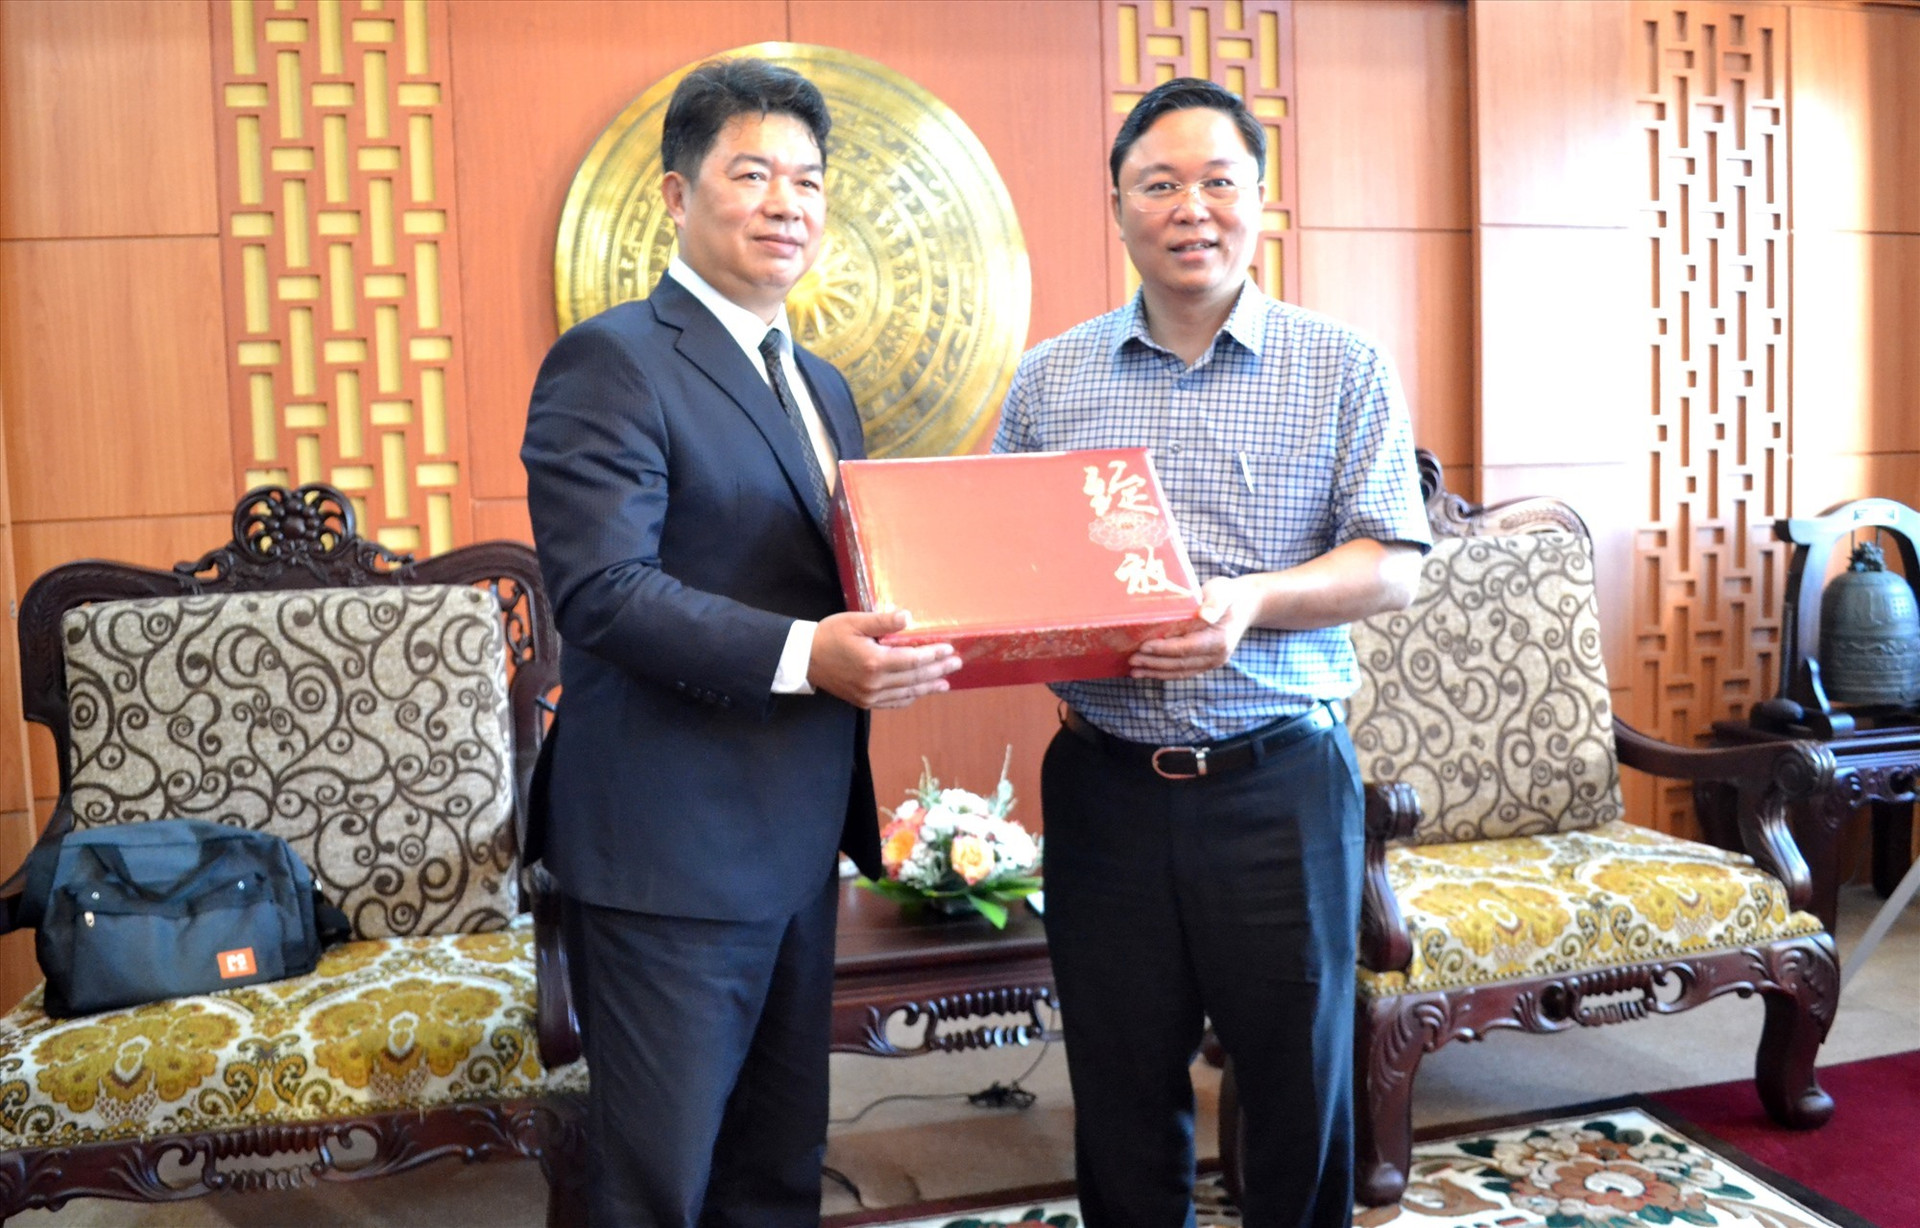 Mr. Han Kuo Yao offers Thanh Taiwan’s special tea